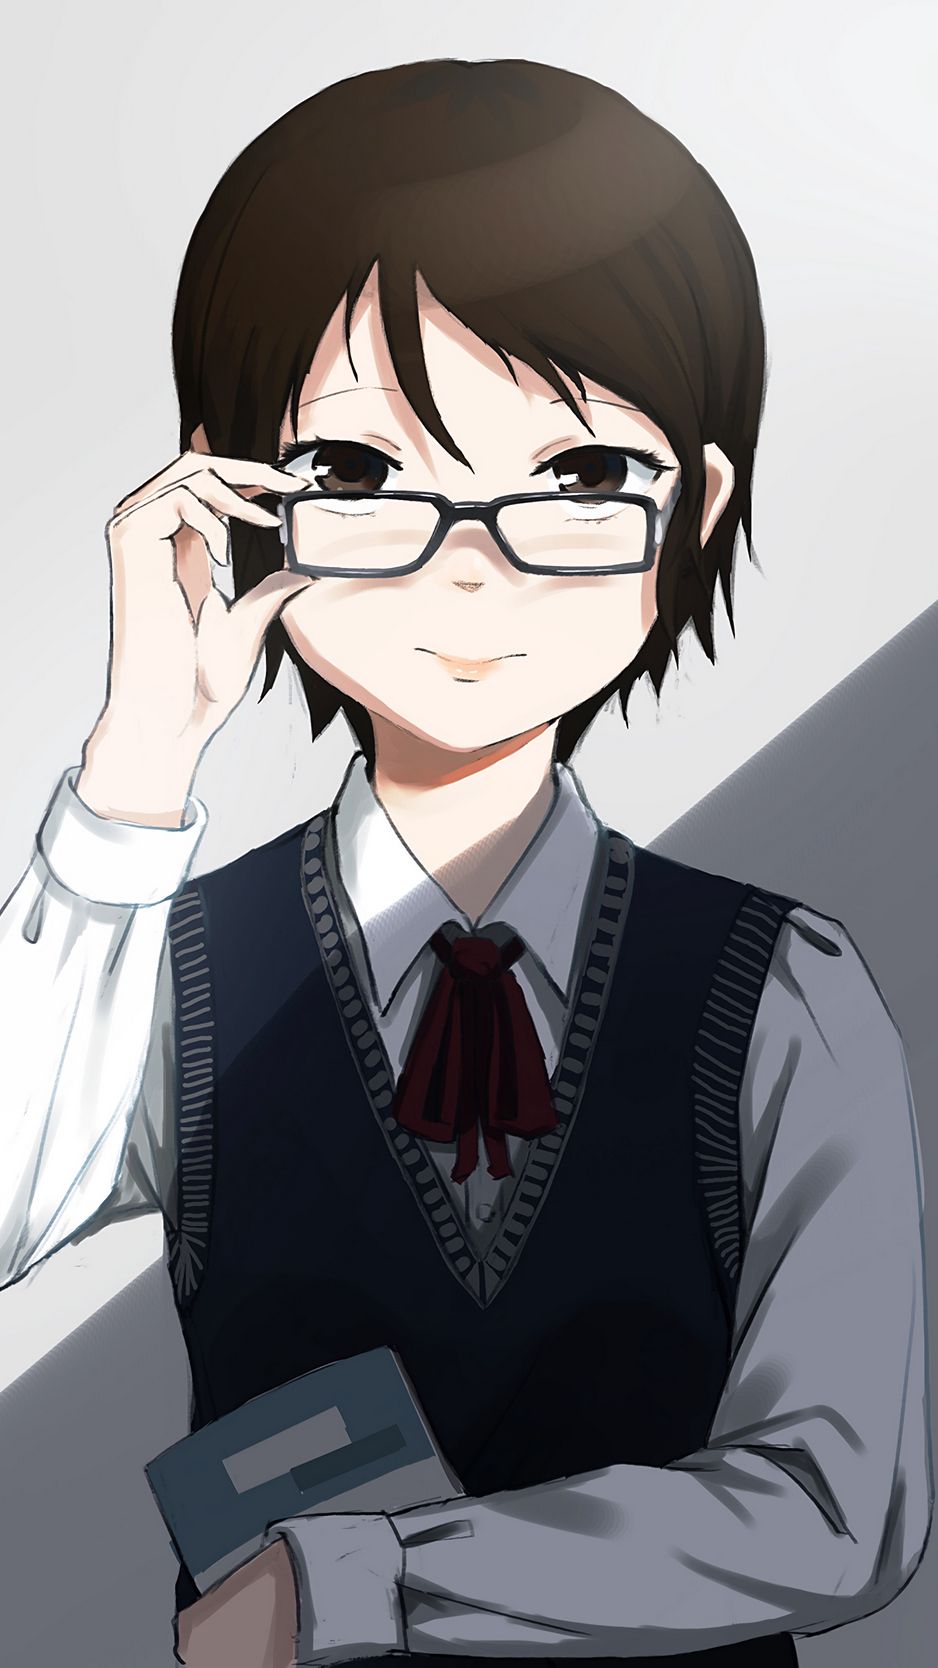 Download wallpaper 938x1668 boy, glasses, anime, art, cartoon iphone  8/7/6s/6 for parallax hd background